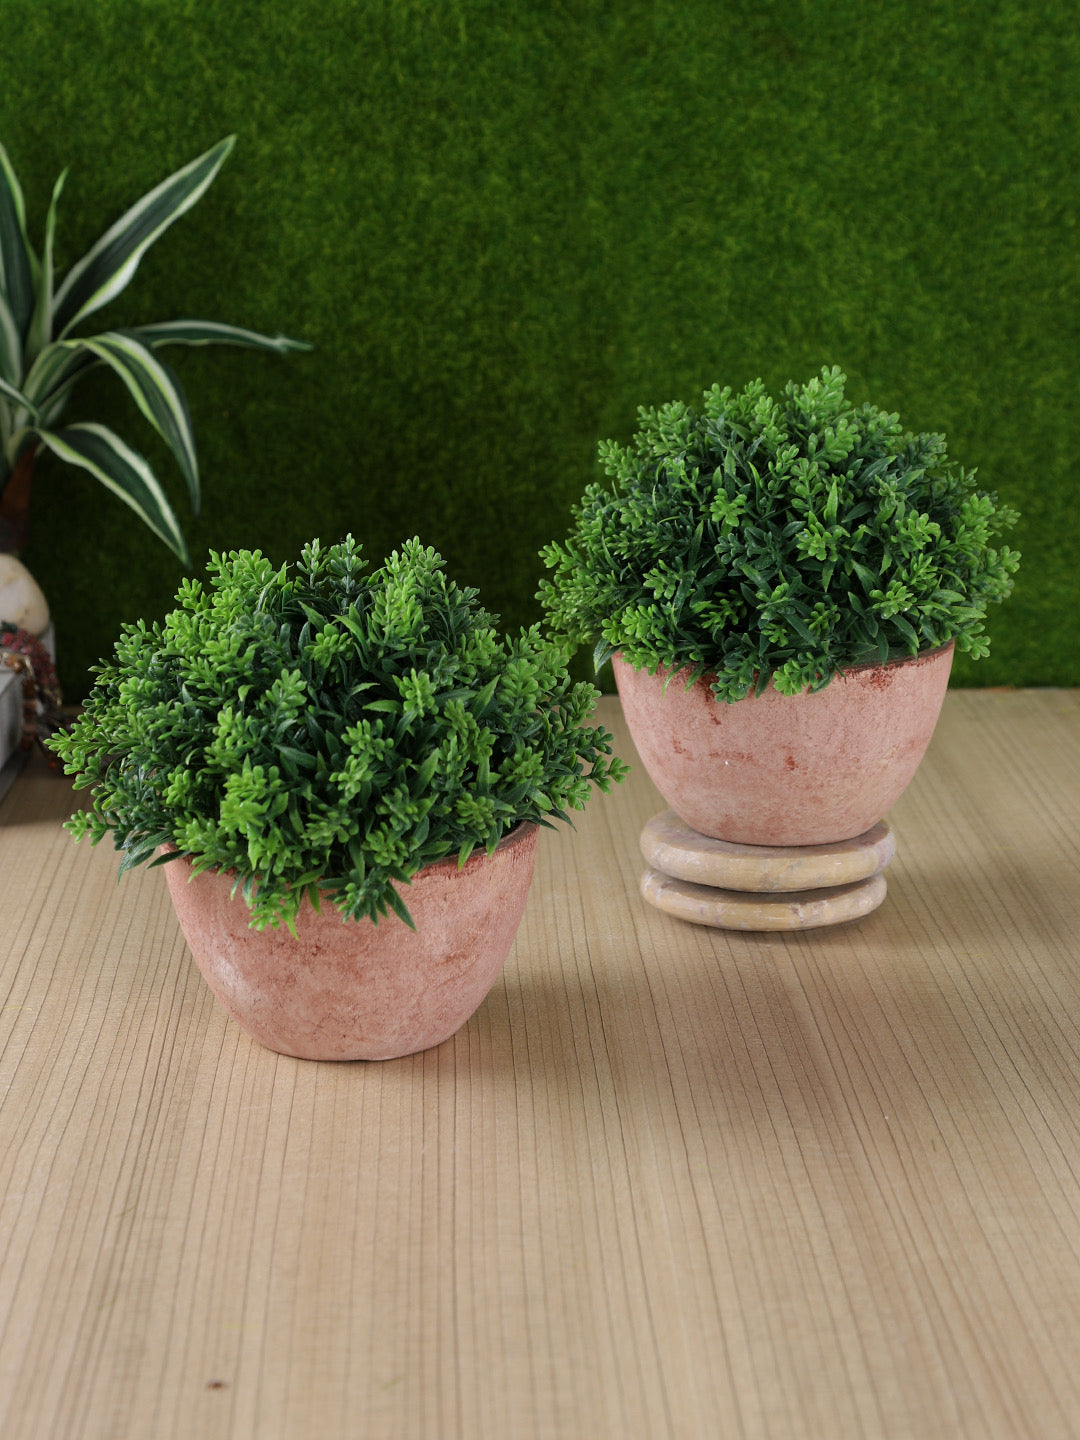 Natural touch Green Indore Artificial Plant with Pot Set of 2 - Default Title (APL2073A_2)